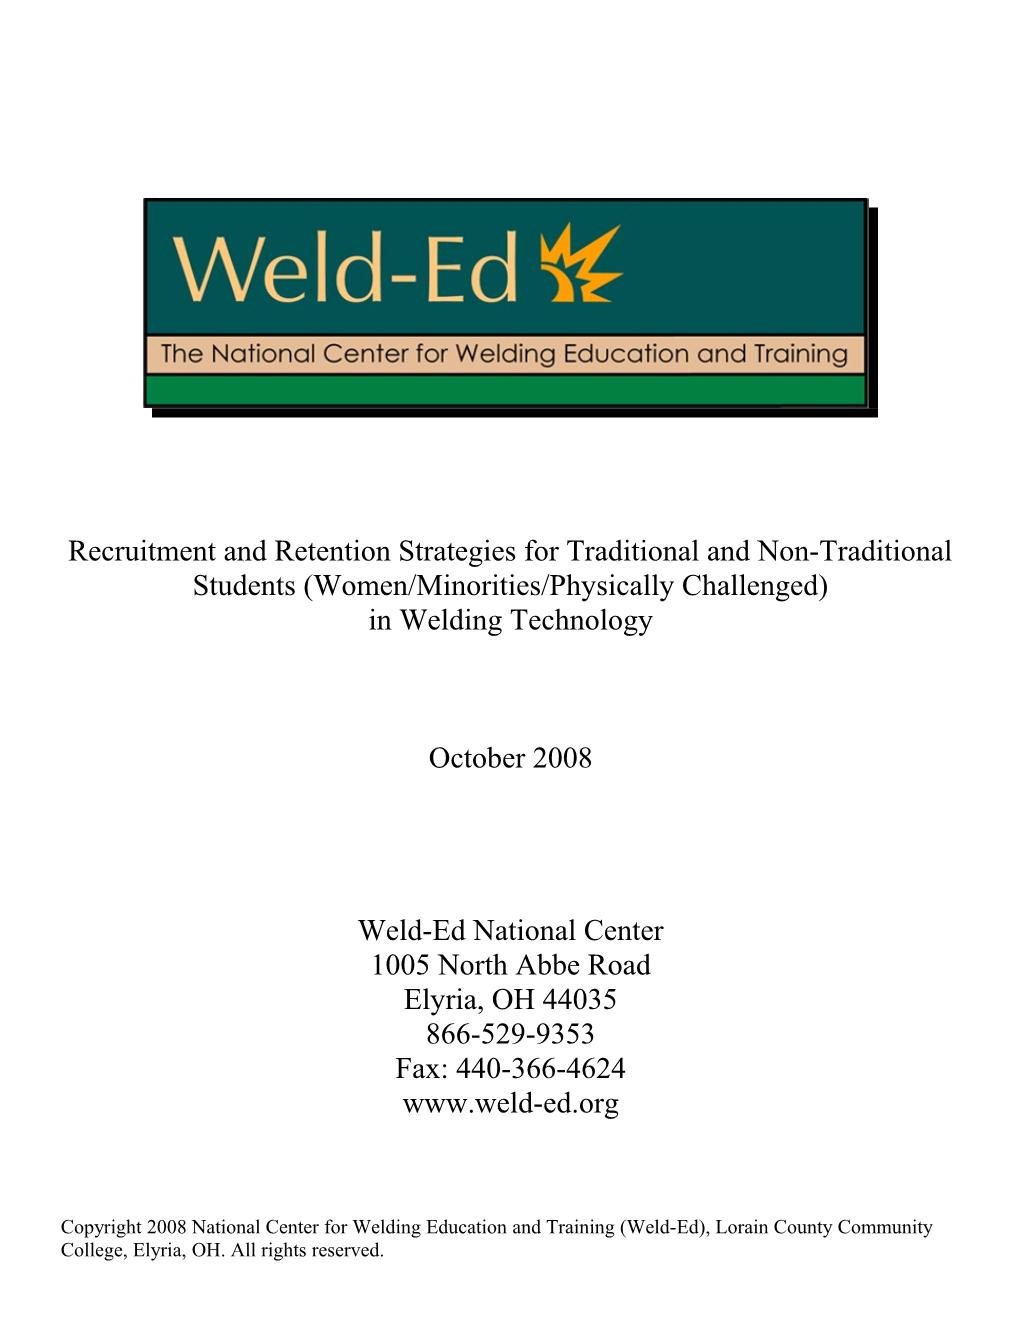 Recruitment and Retention Strategies for Traditional and Non-Traditional Students